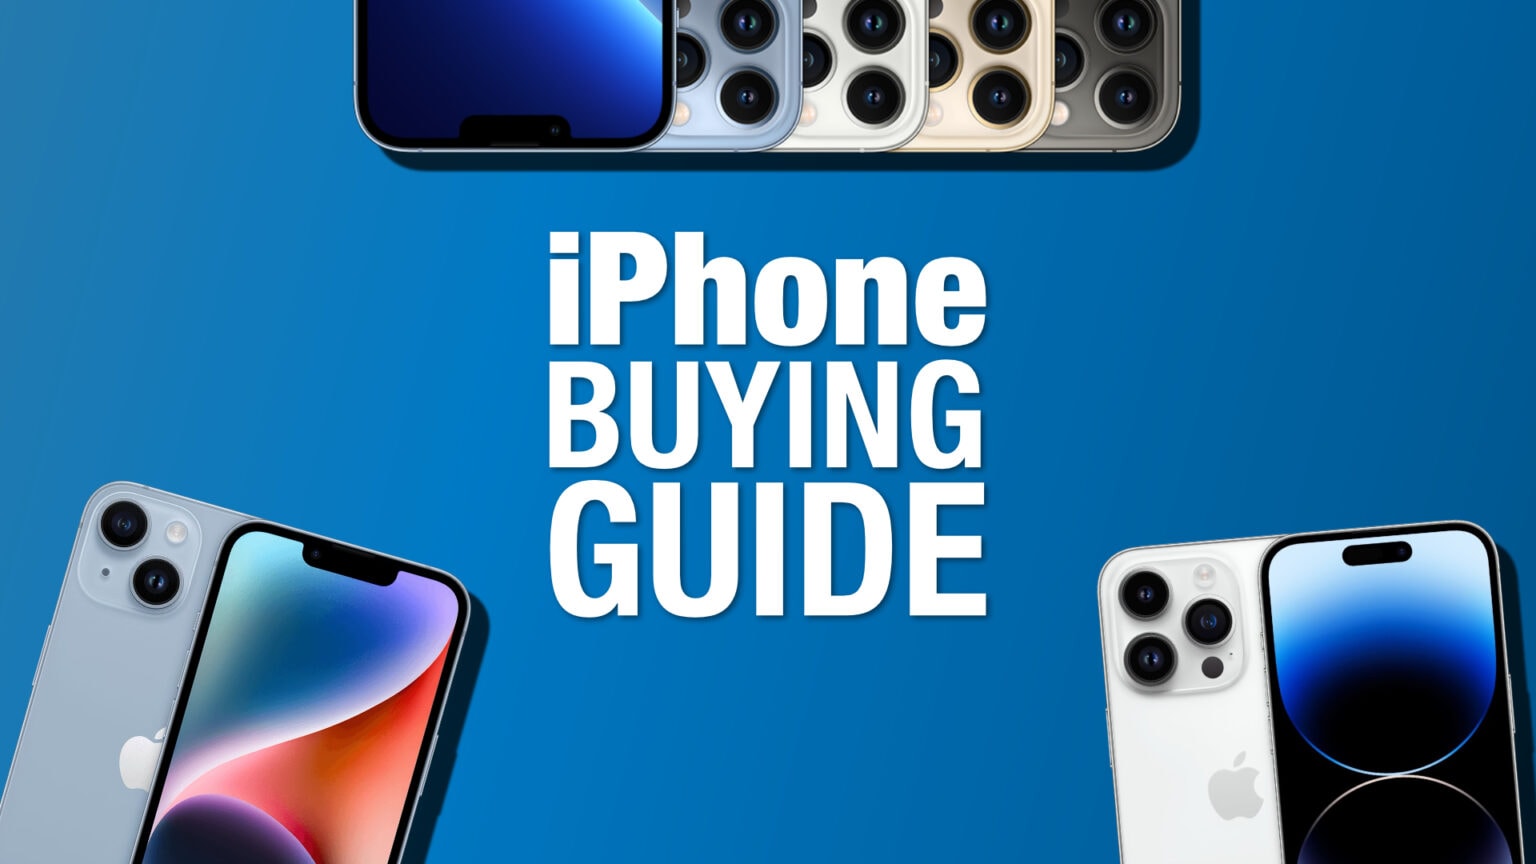 iPhone buying guide: Choose the best models and accessories